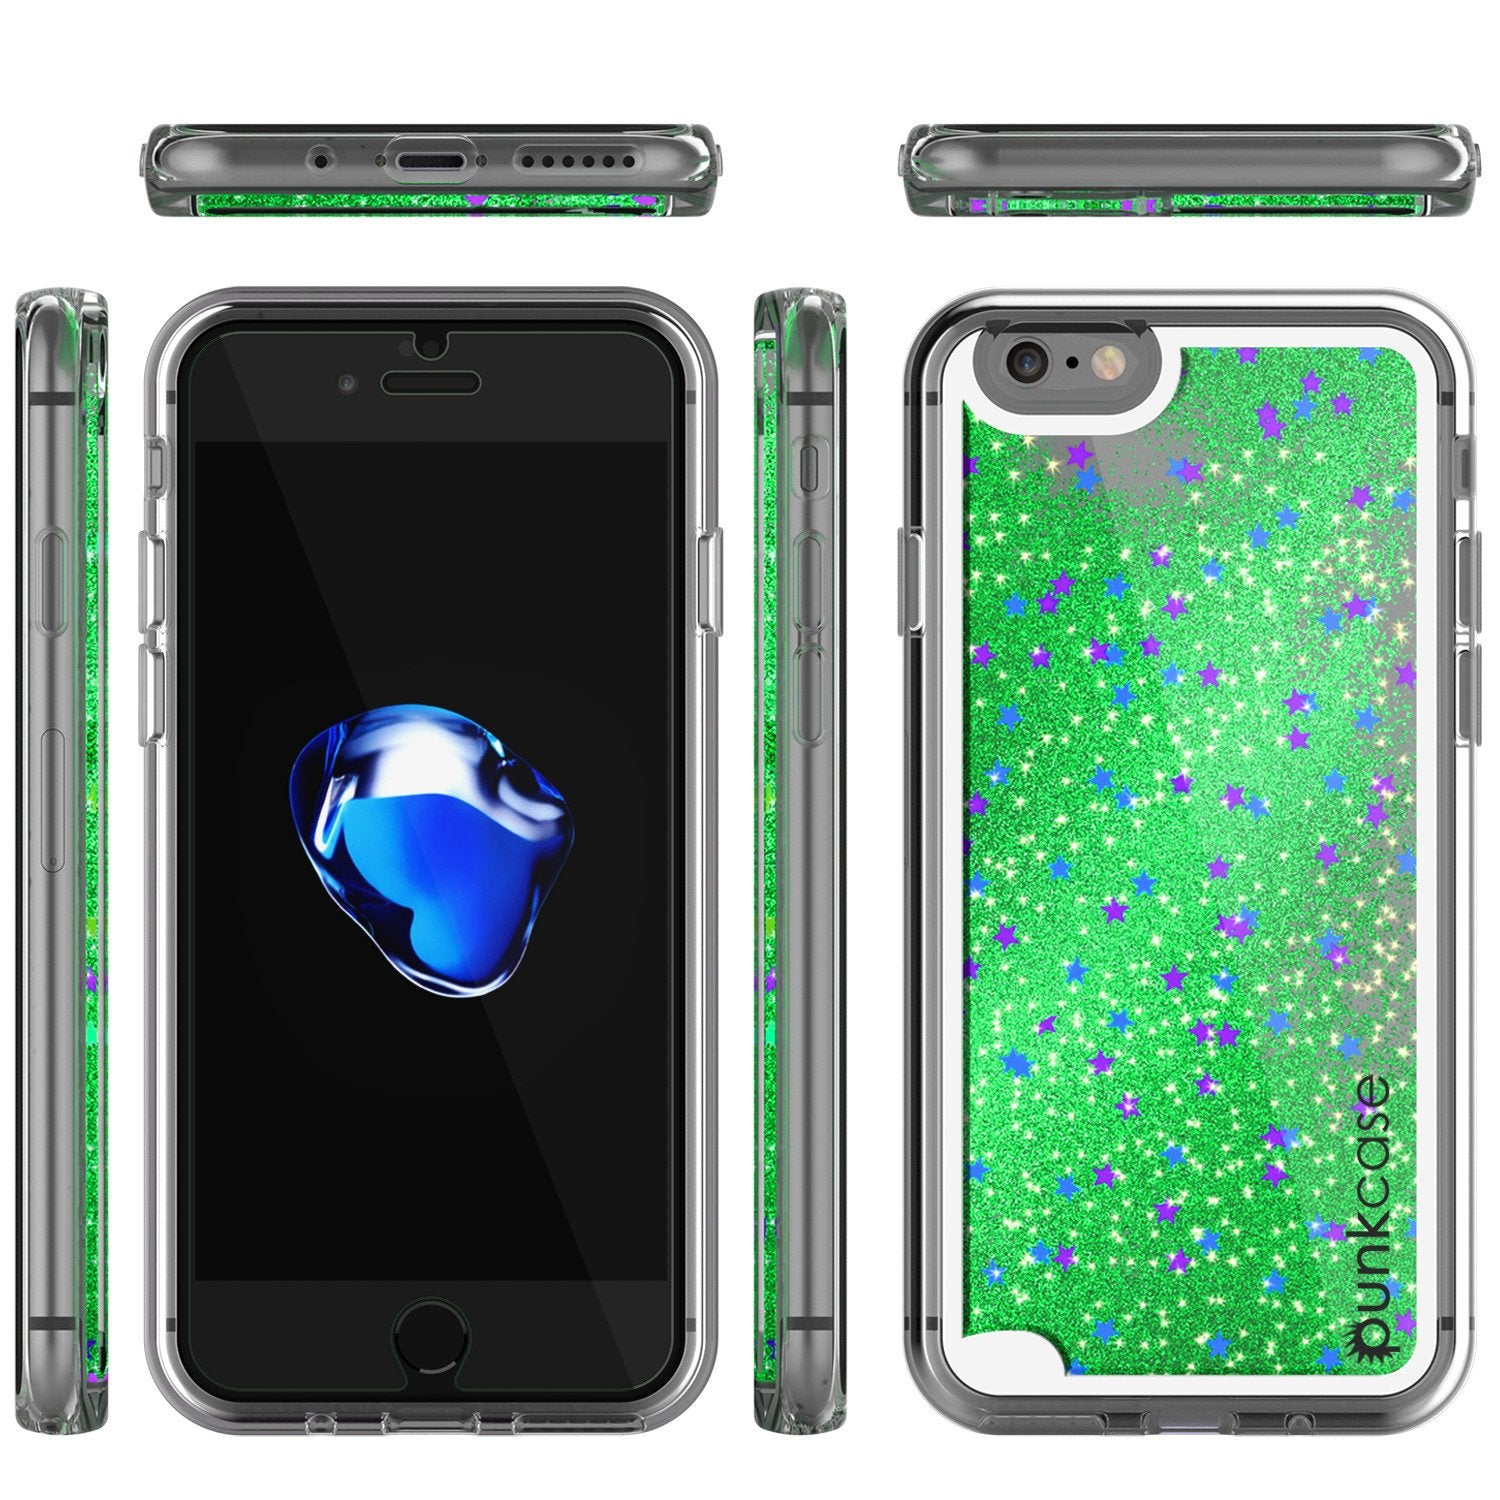 iPhone 7 Case, PunkCase LIQUID Green Series, Protective Dual Layer Floating Glitter Cover